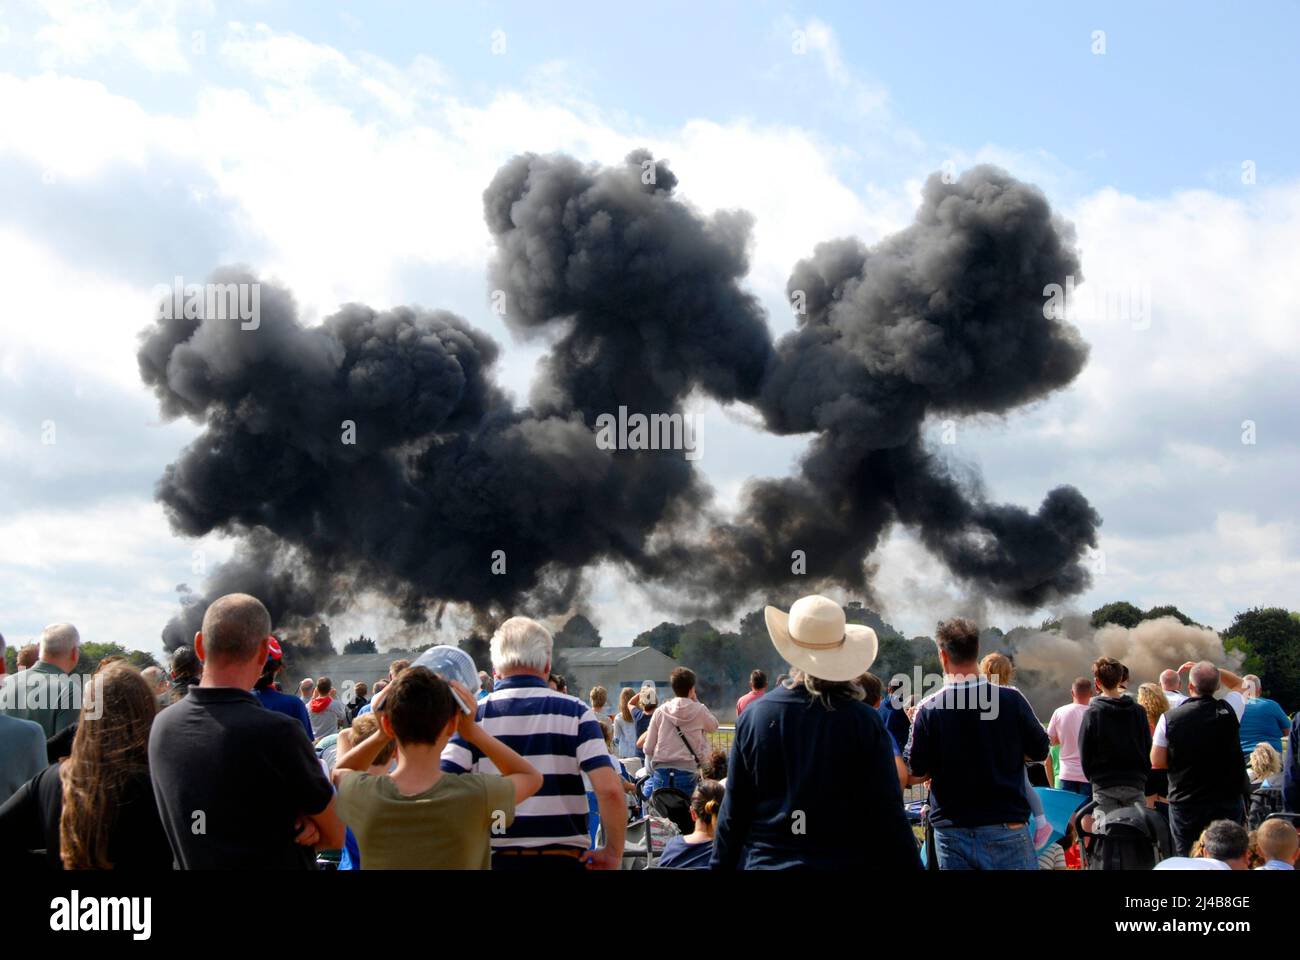 A mock explosion at an air show with lots of smoke and loud bangs to illustrate war-like conditions in a safe manner, Biggin Hill Stock Photo